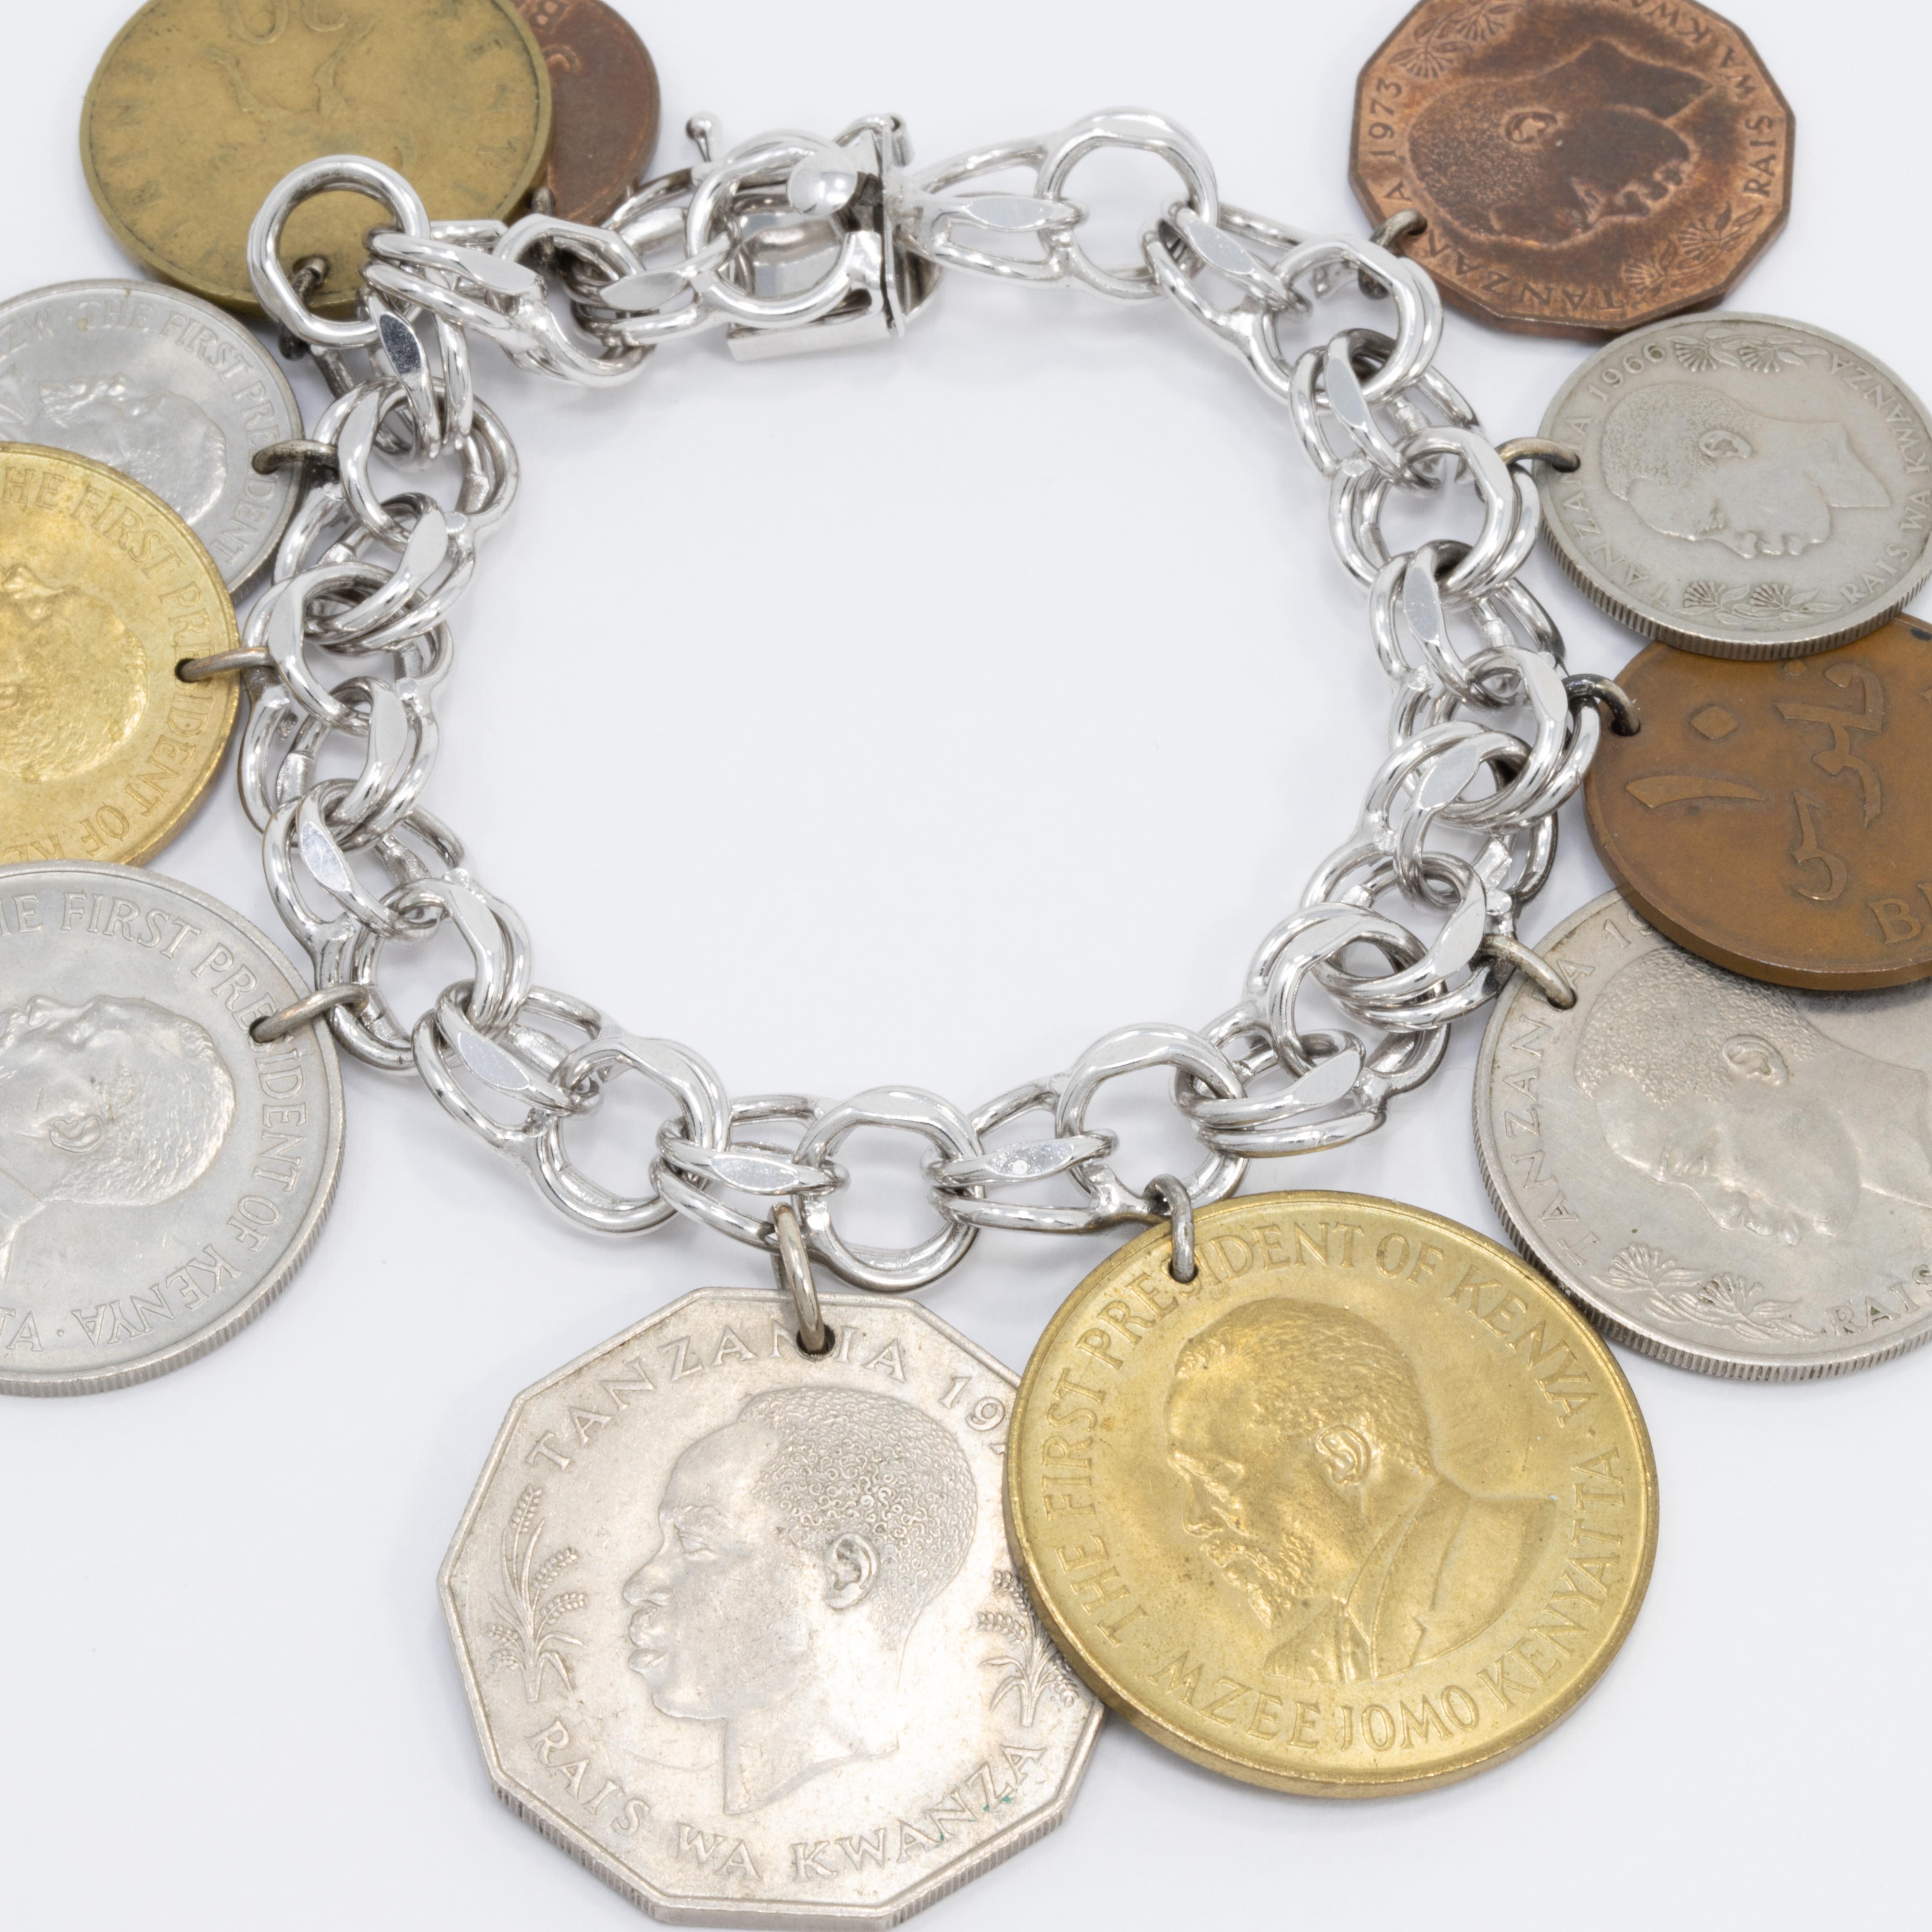 Sterling silver chain bracelet from Eton, featuring dangling African coin charms from Tanzania, Bahrain, and Kenya.

Box clasp closure.

Marks/hallmarks: Sterling, Eton